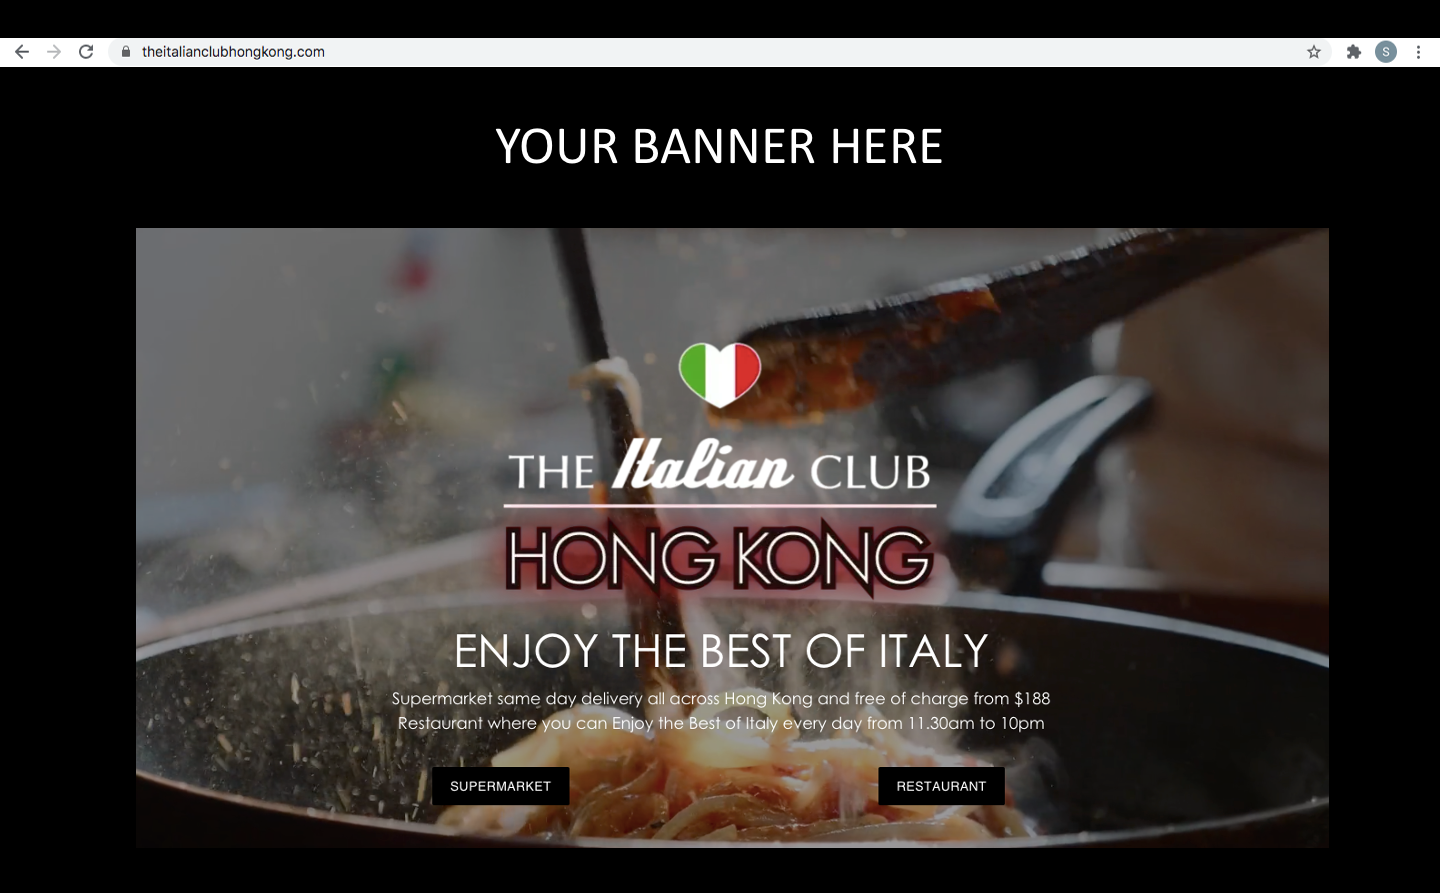 ADVERTISING WITH THE ITALIAN CLUB